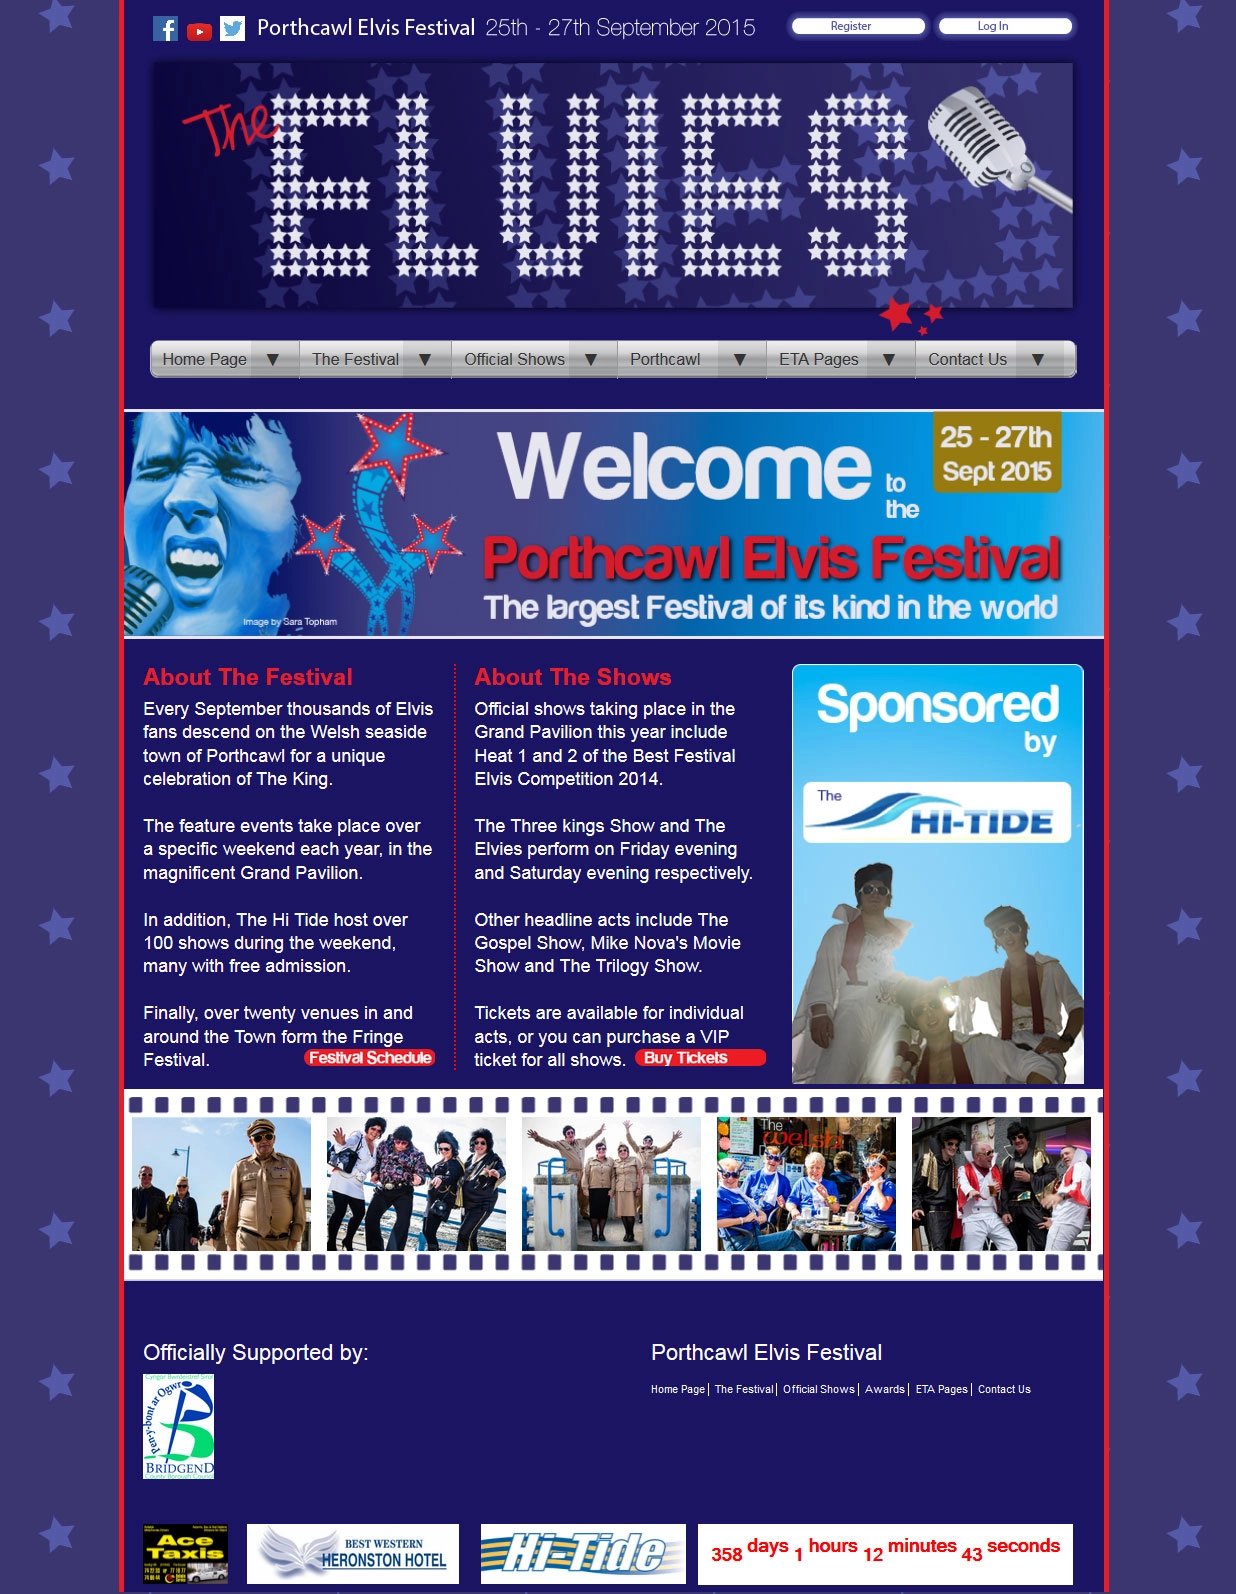 An image from the Elvies web site